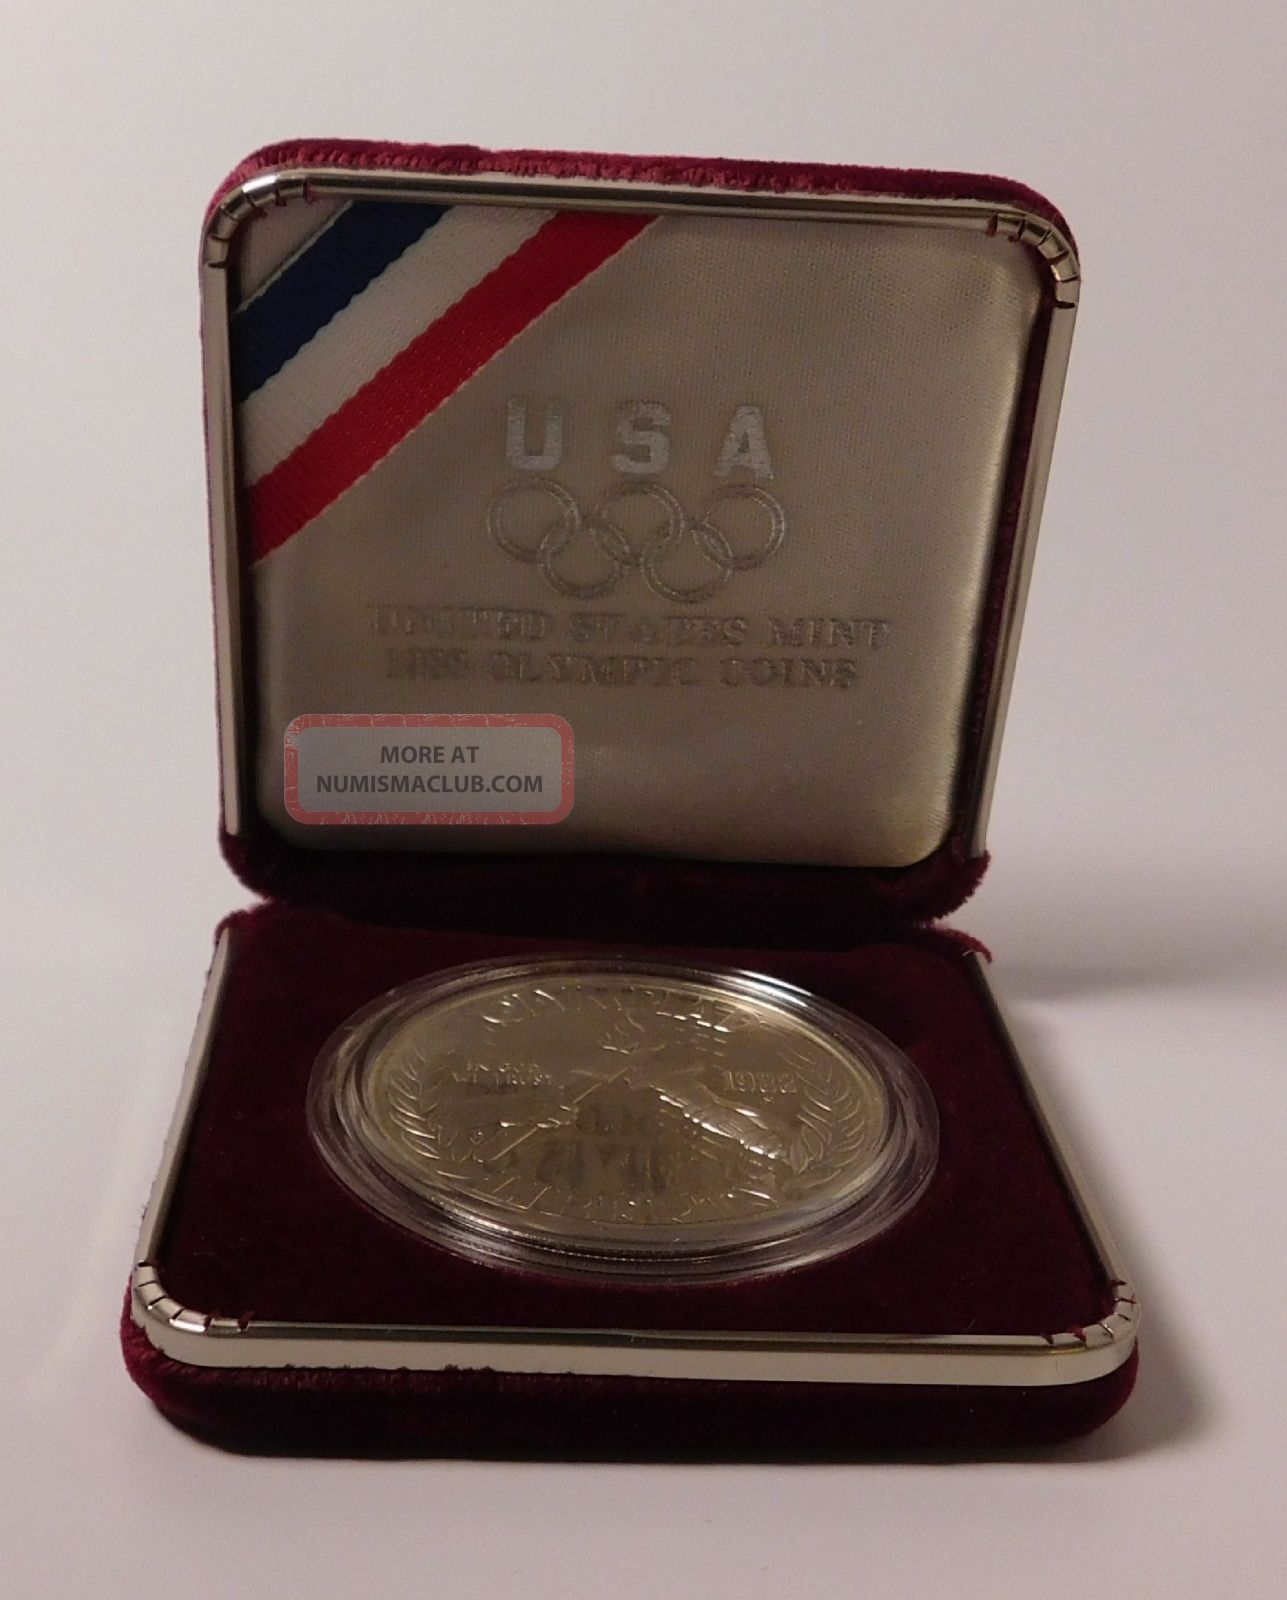 1988 Us Olympic 900 Silver Dollar Coin Proof No Packing Box Or